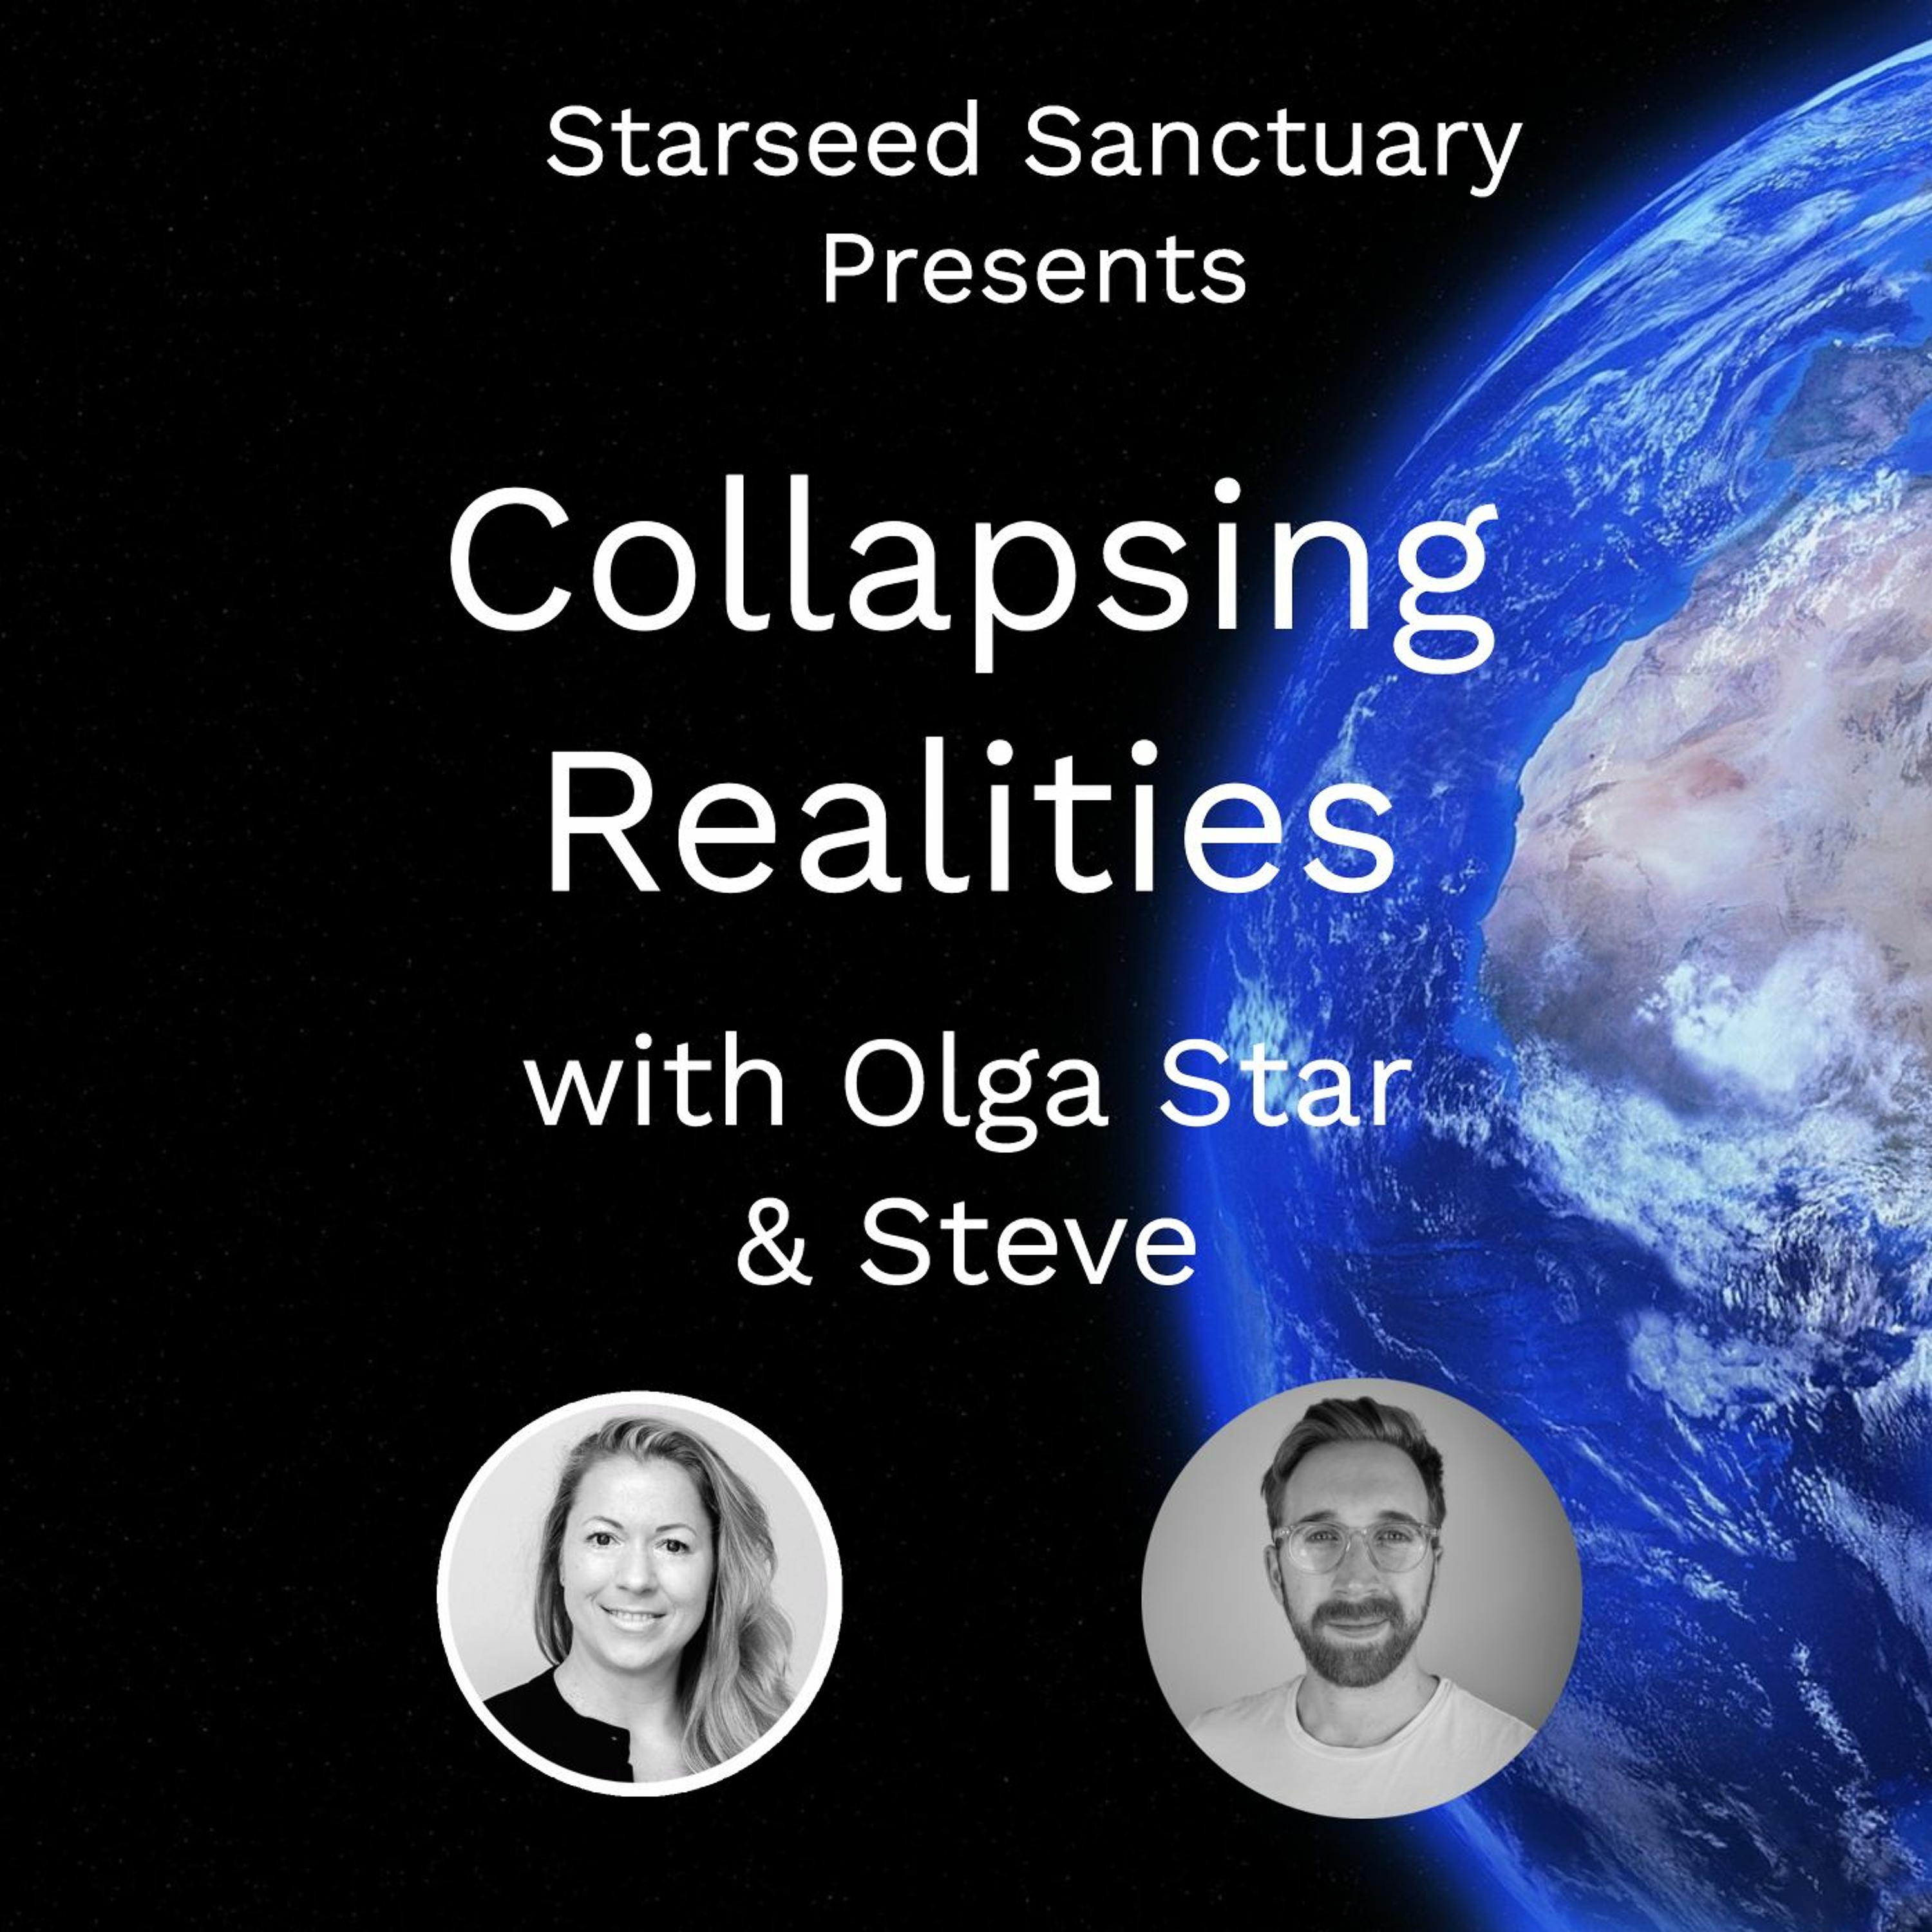 Collapsing Realities